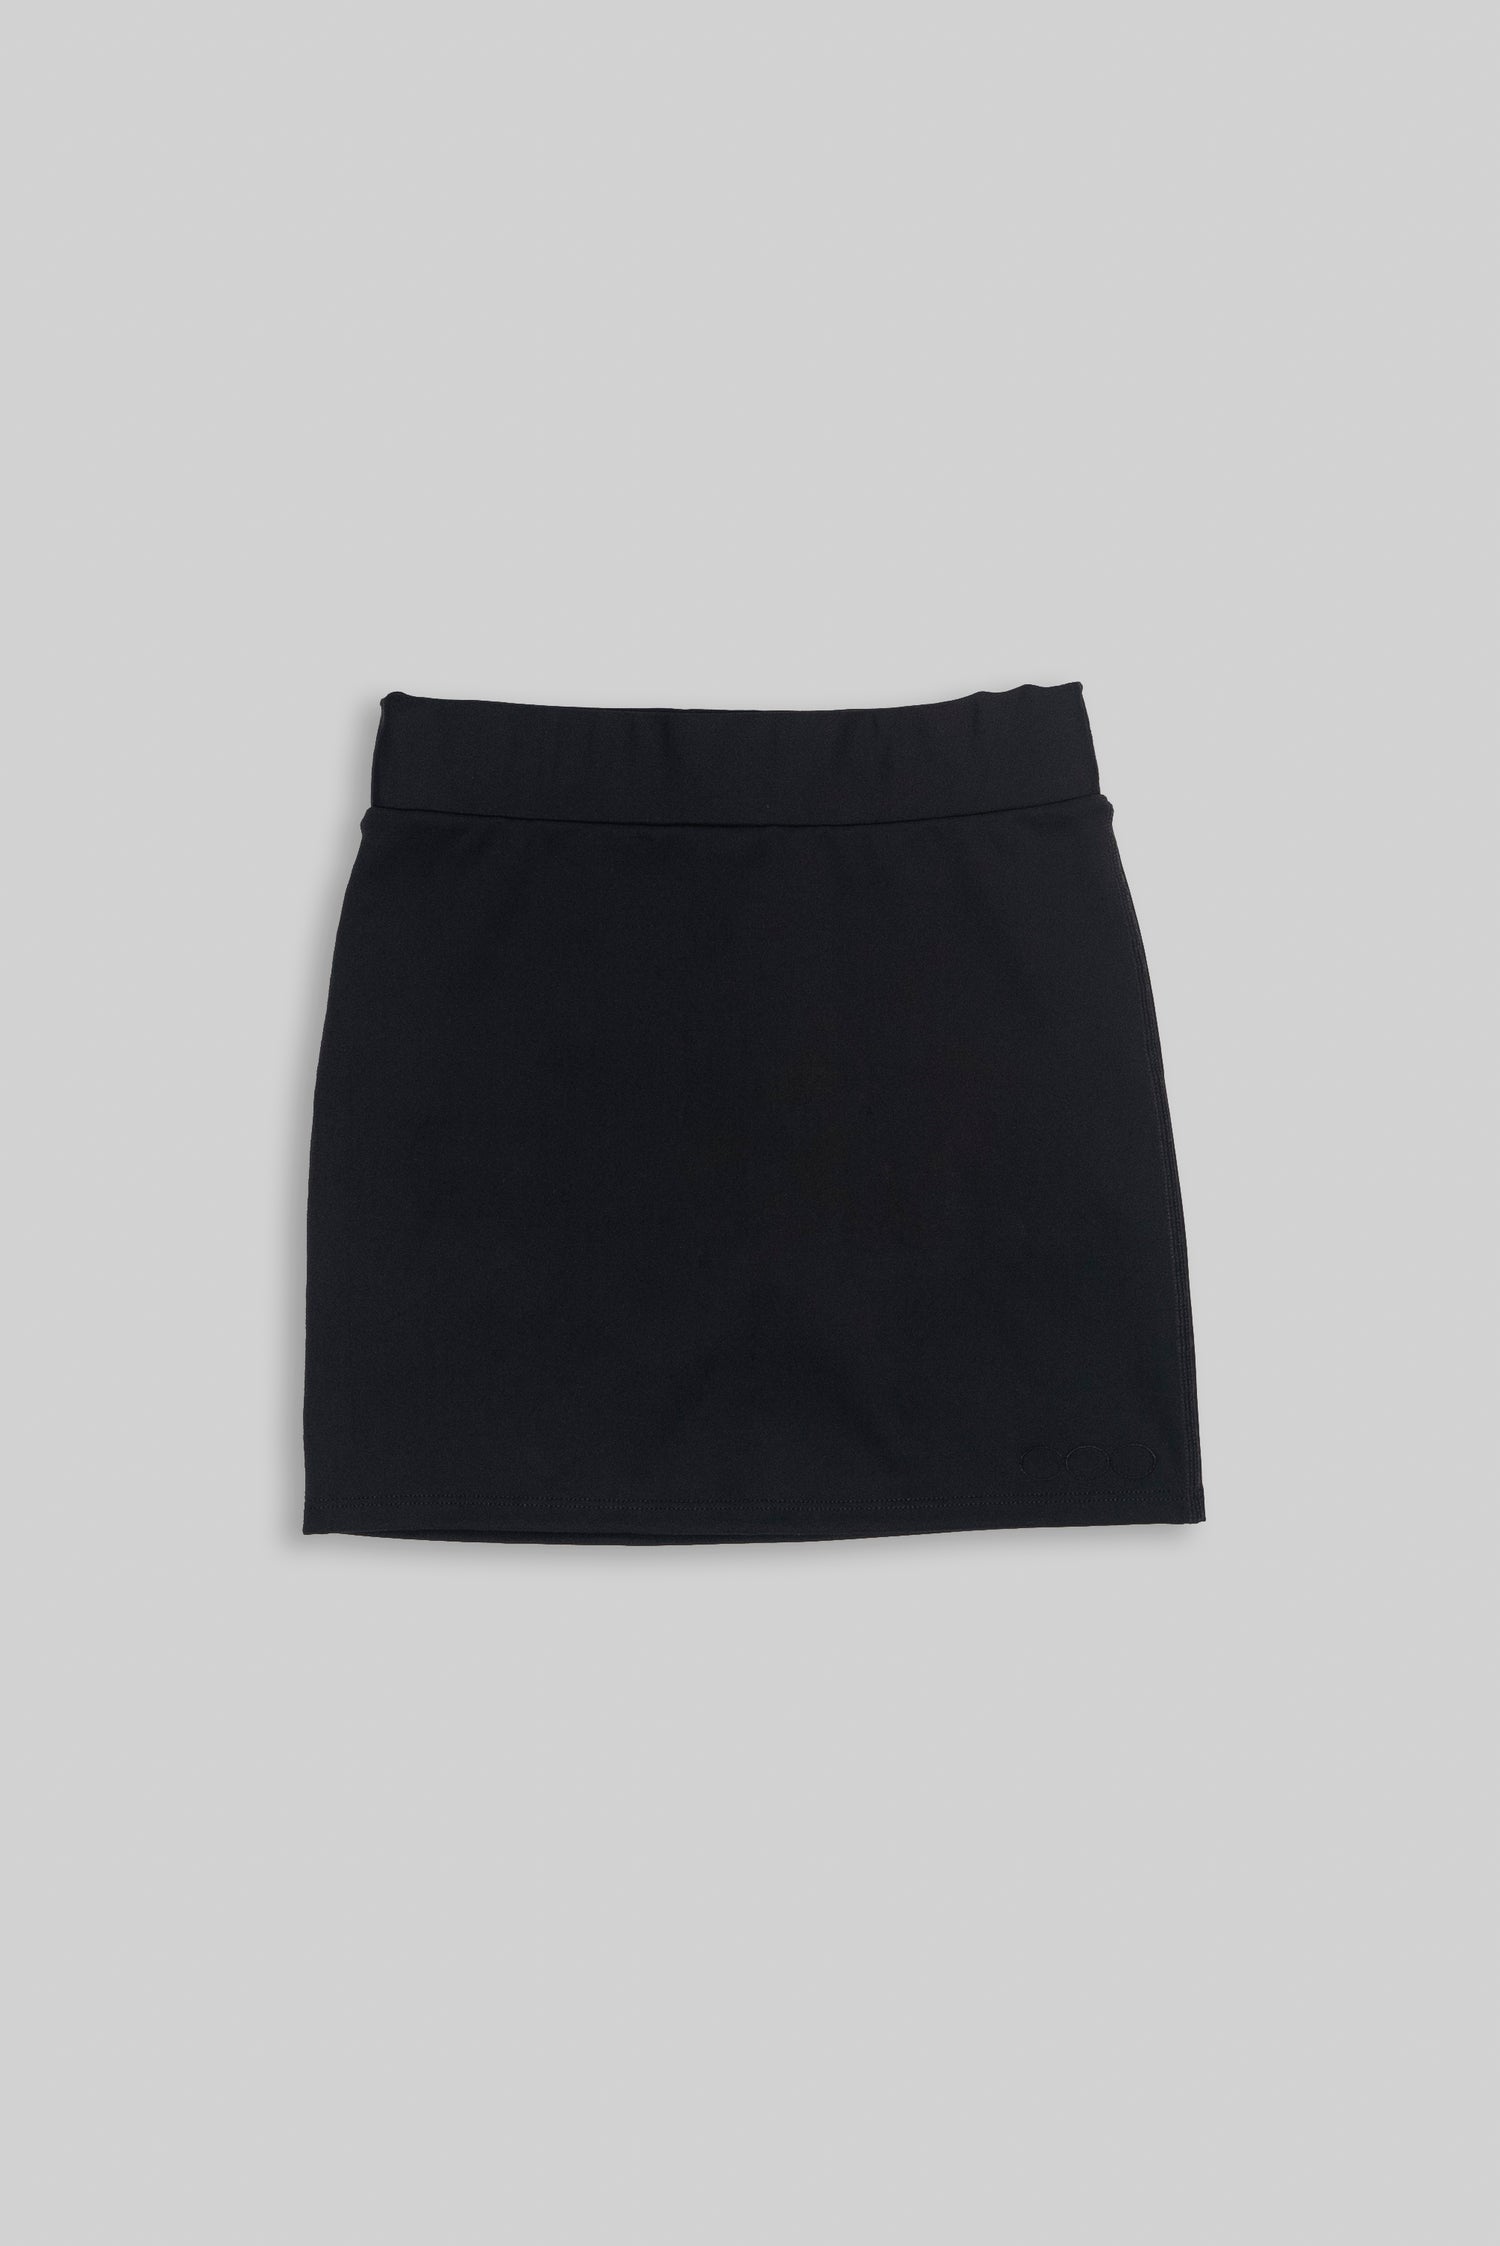 The "Out of Office" Mini Skirt